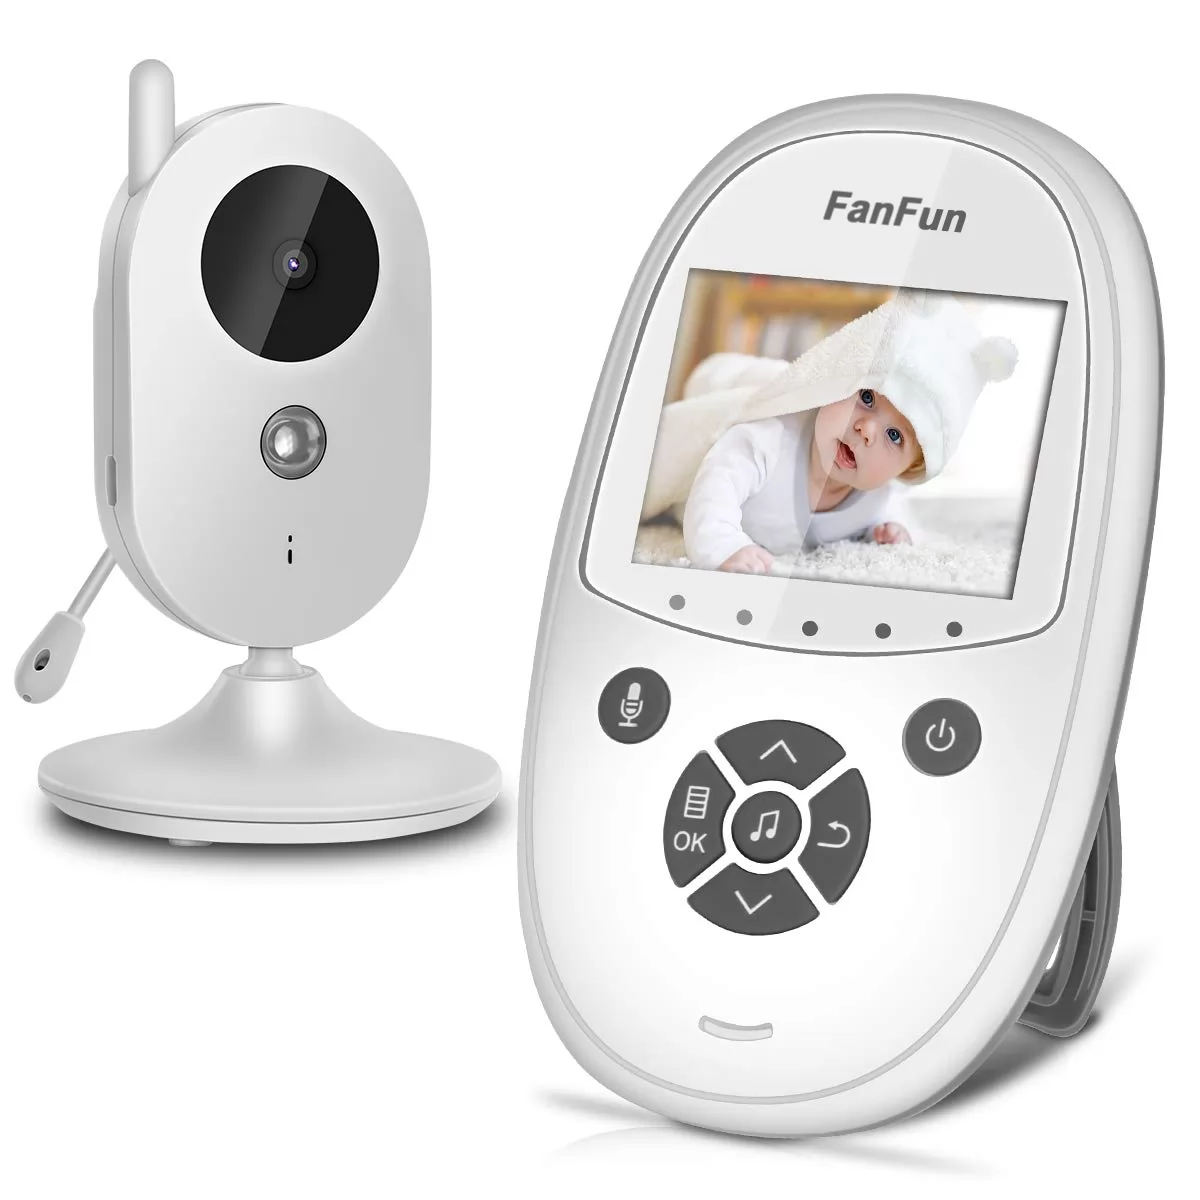 FanFun Wireless Baby Monitors, Baby Monitor with Camera and Audio, Infrared Night Vision & Temperature Display